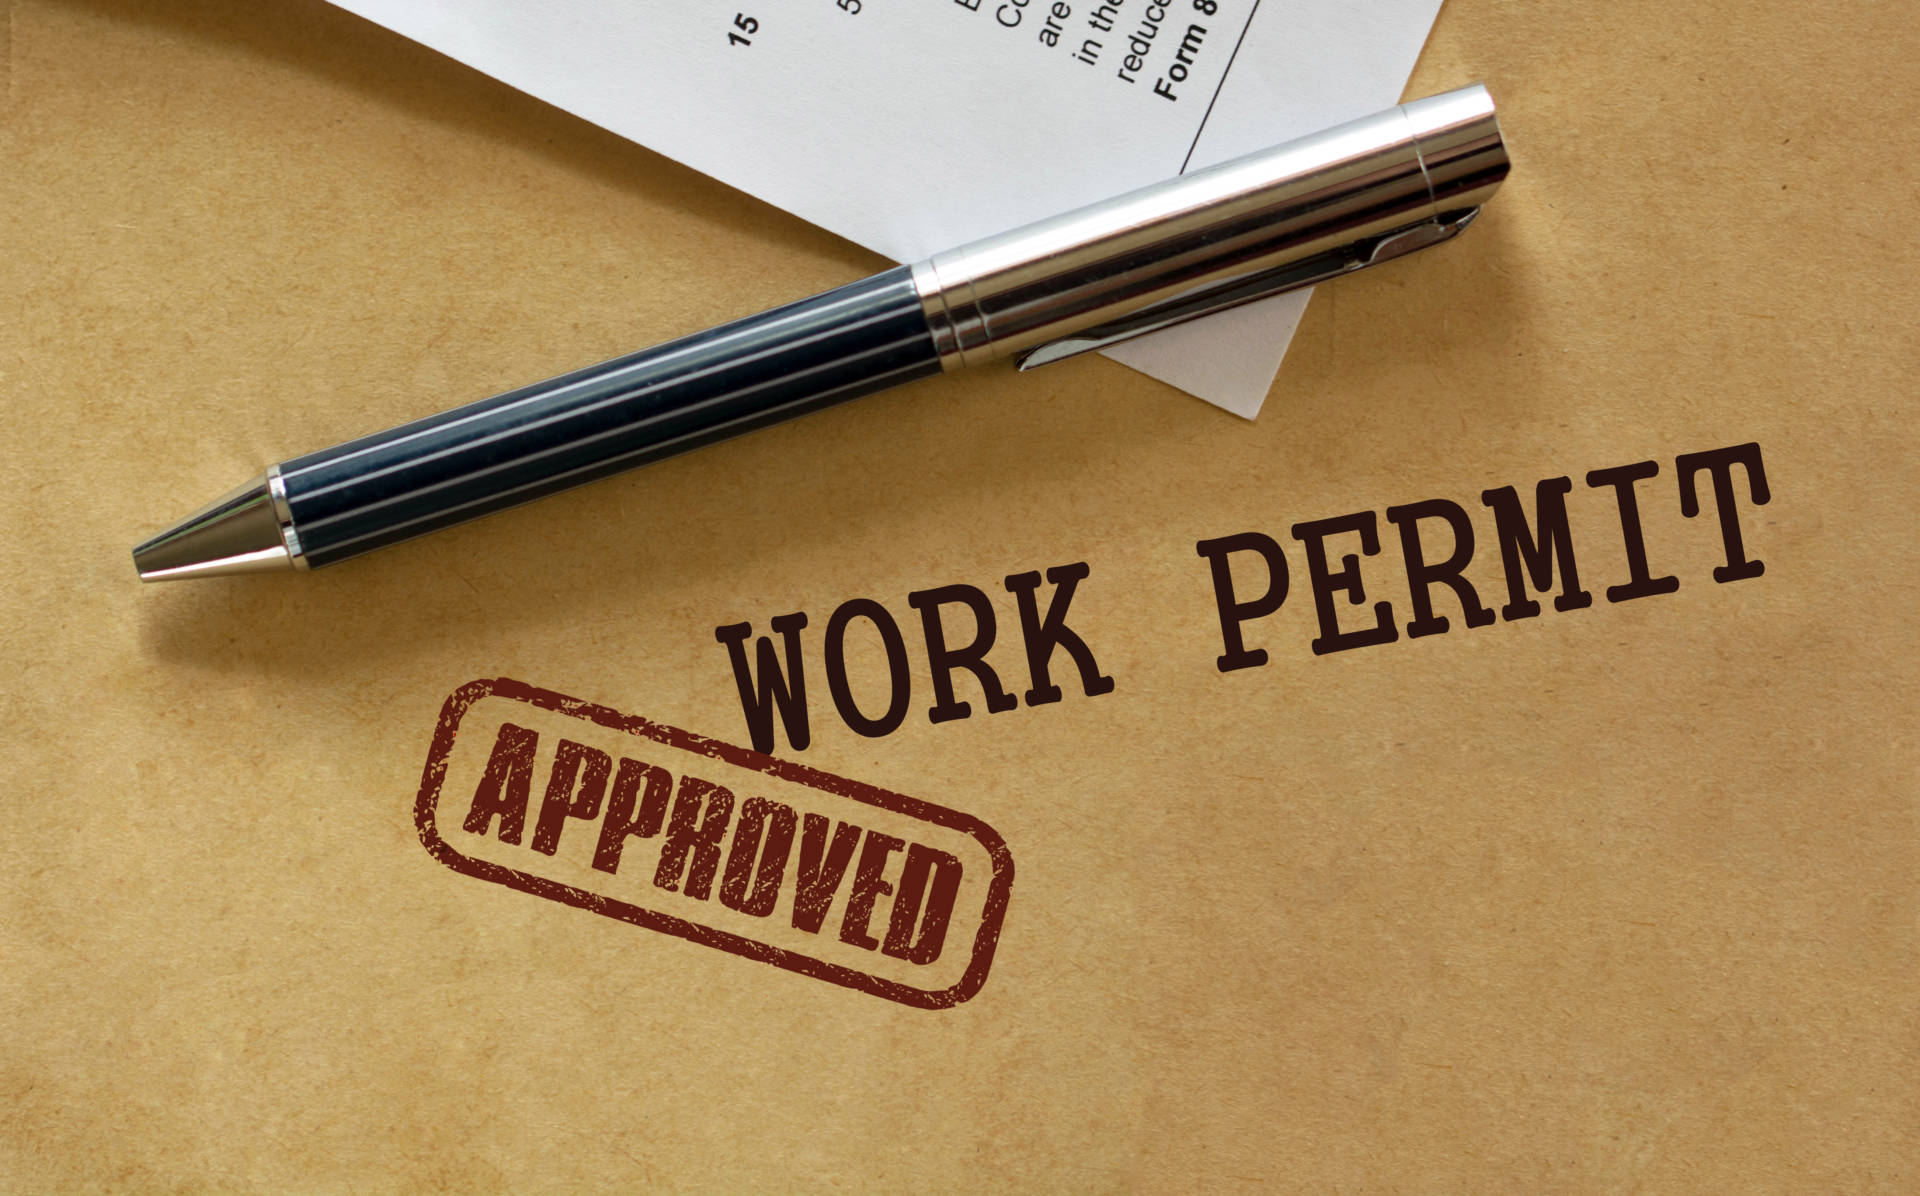 Approved work permit.